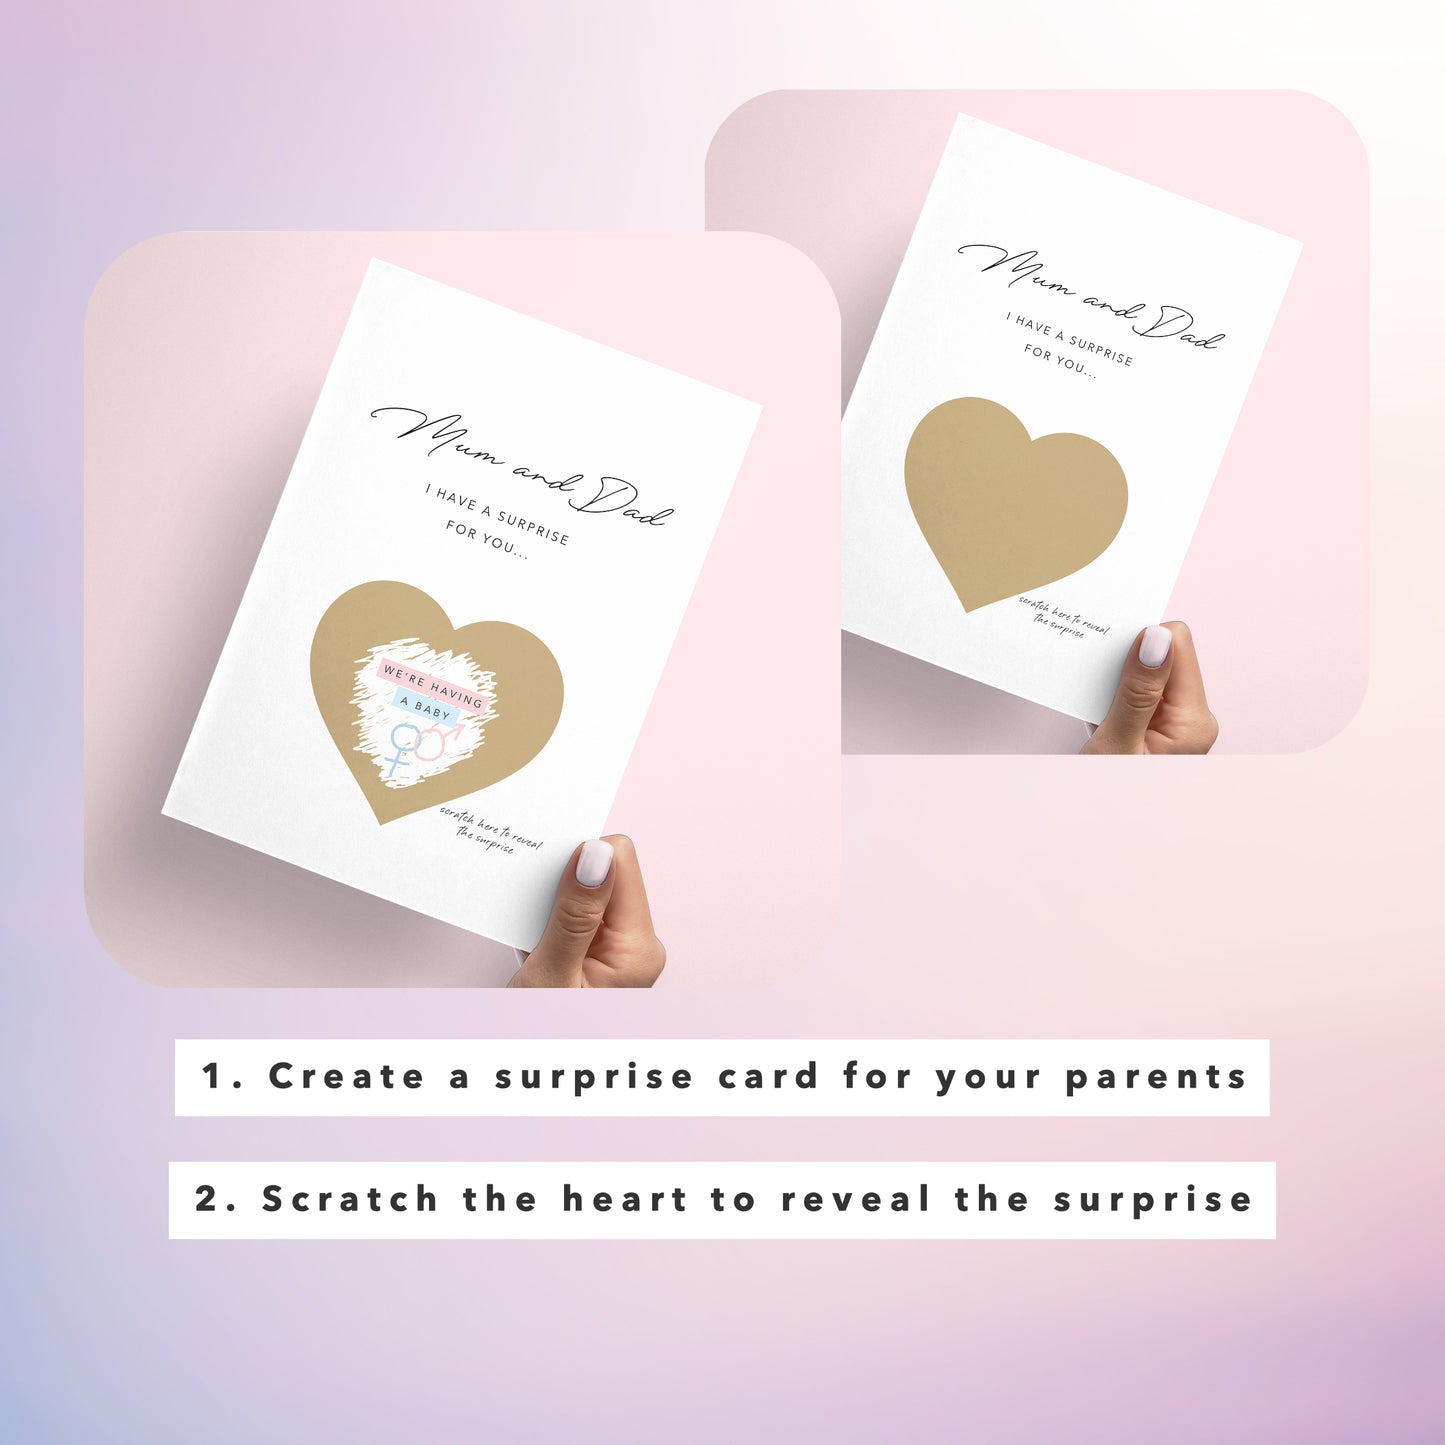 Scratch and reveal card - how to create